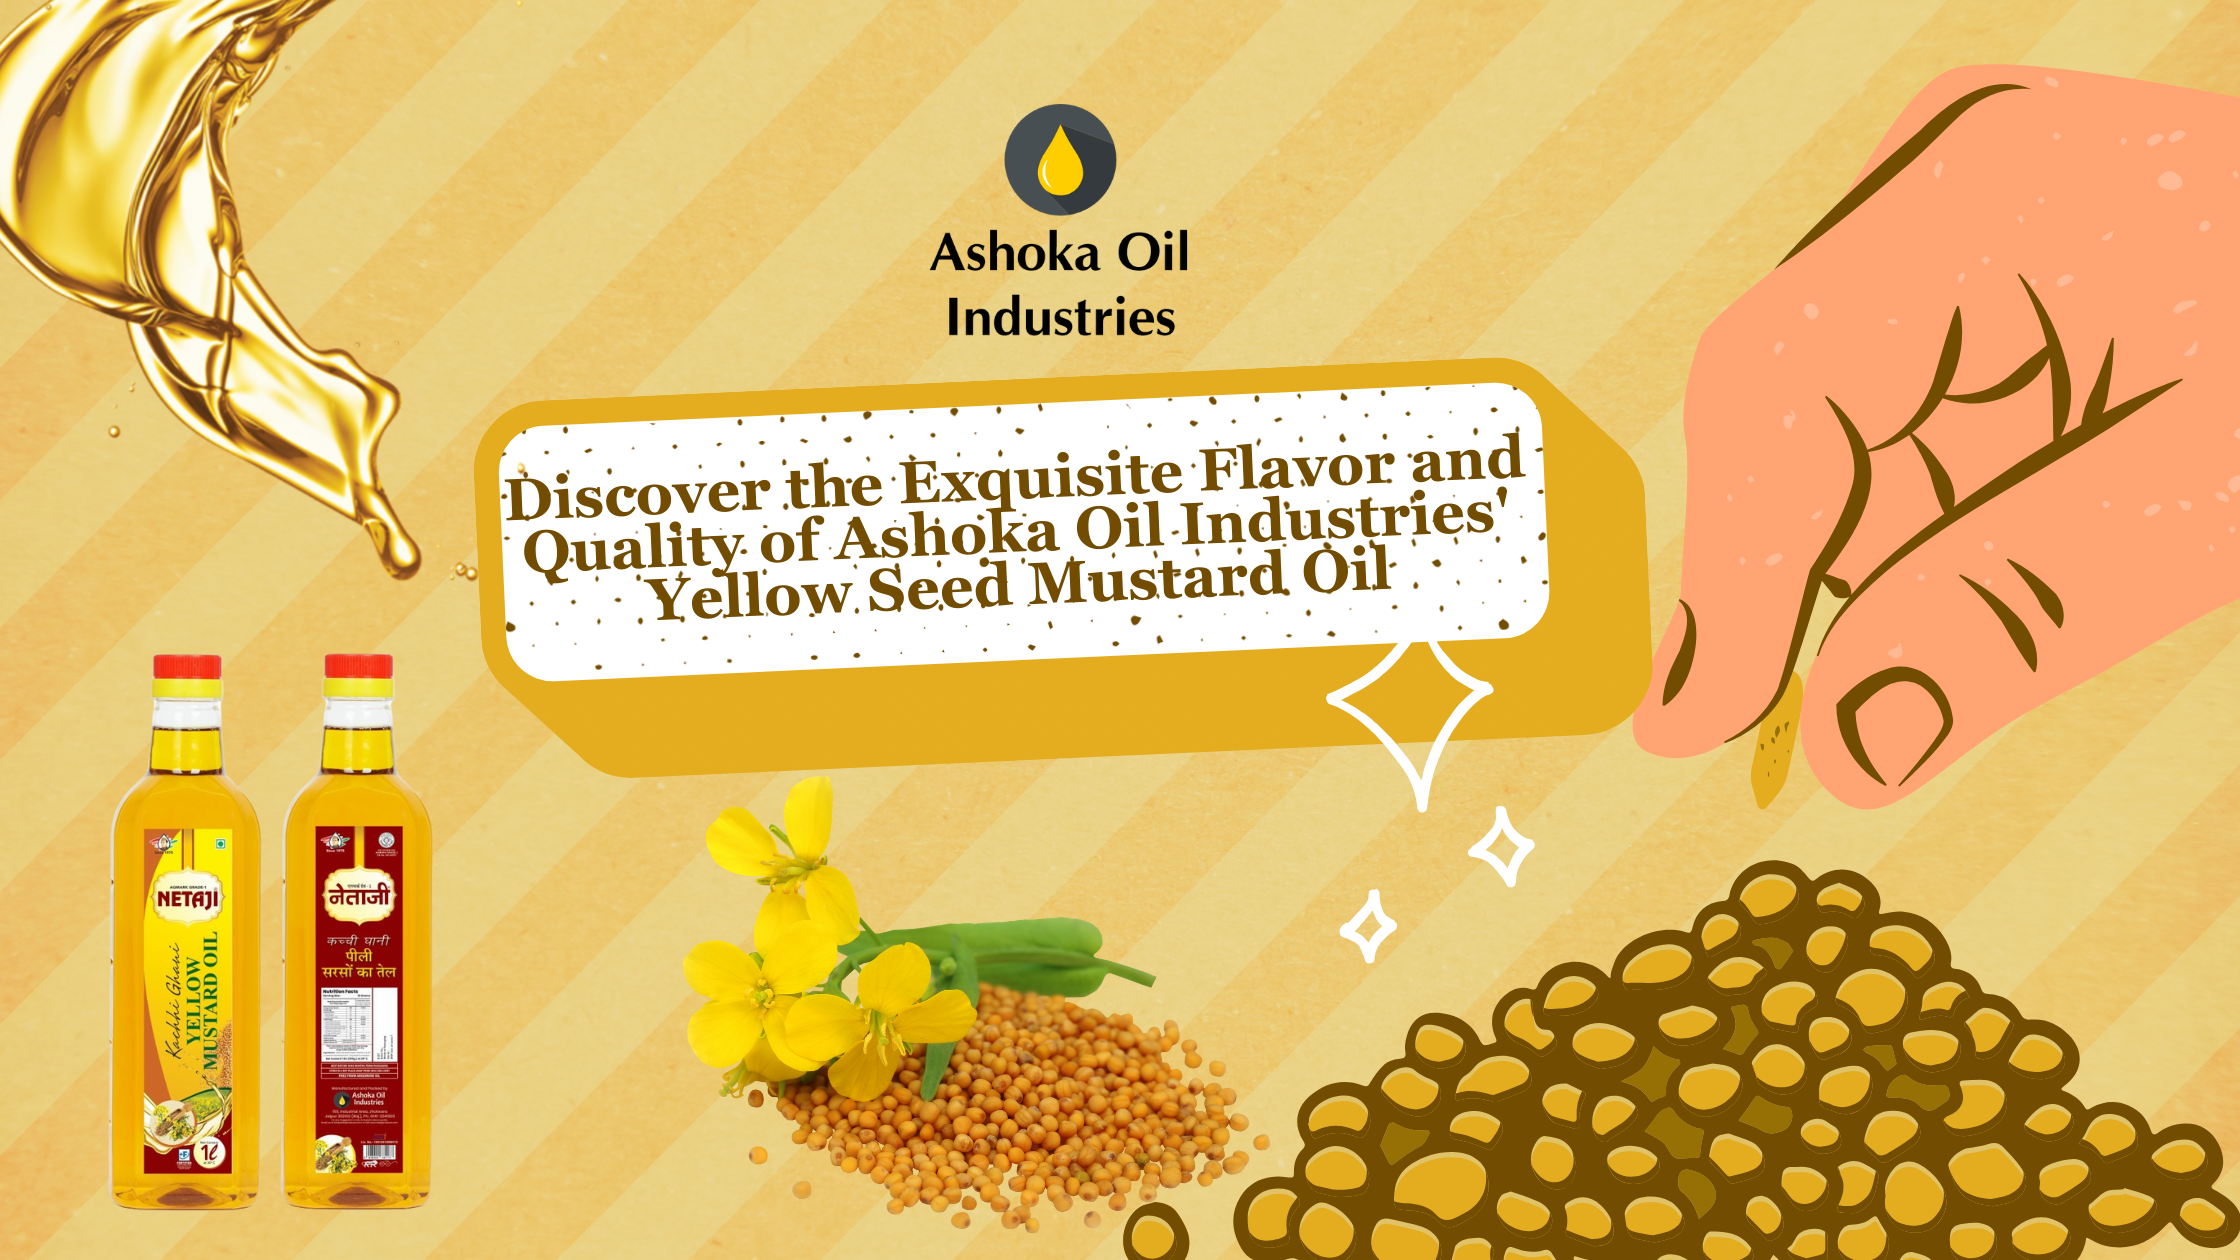 Discover the Exquisite Flavor and Quality of Ashoka Oil Industries’ Yellow Seed Mustard Oil